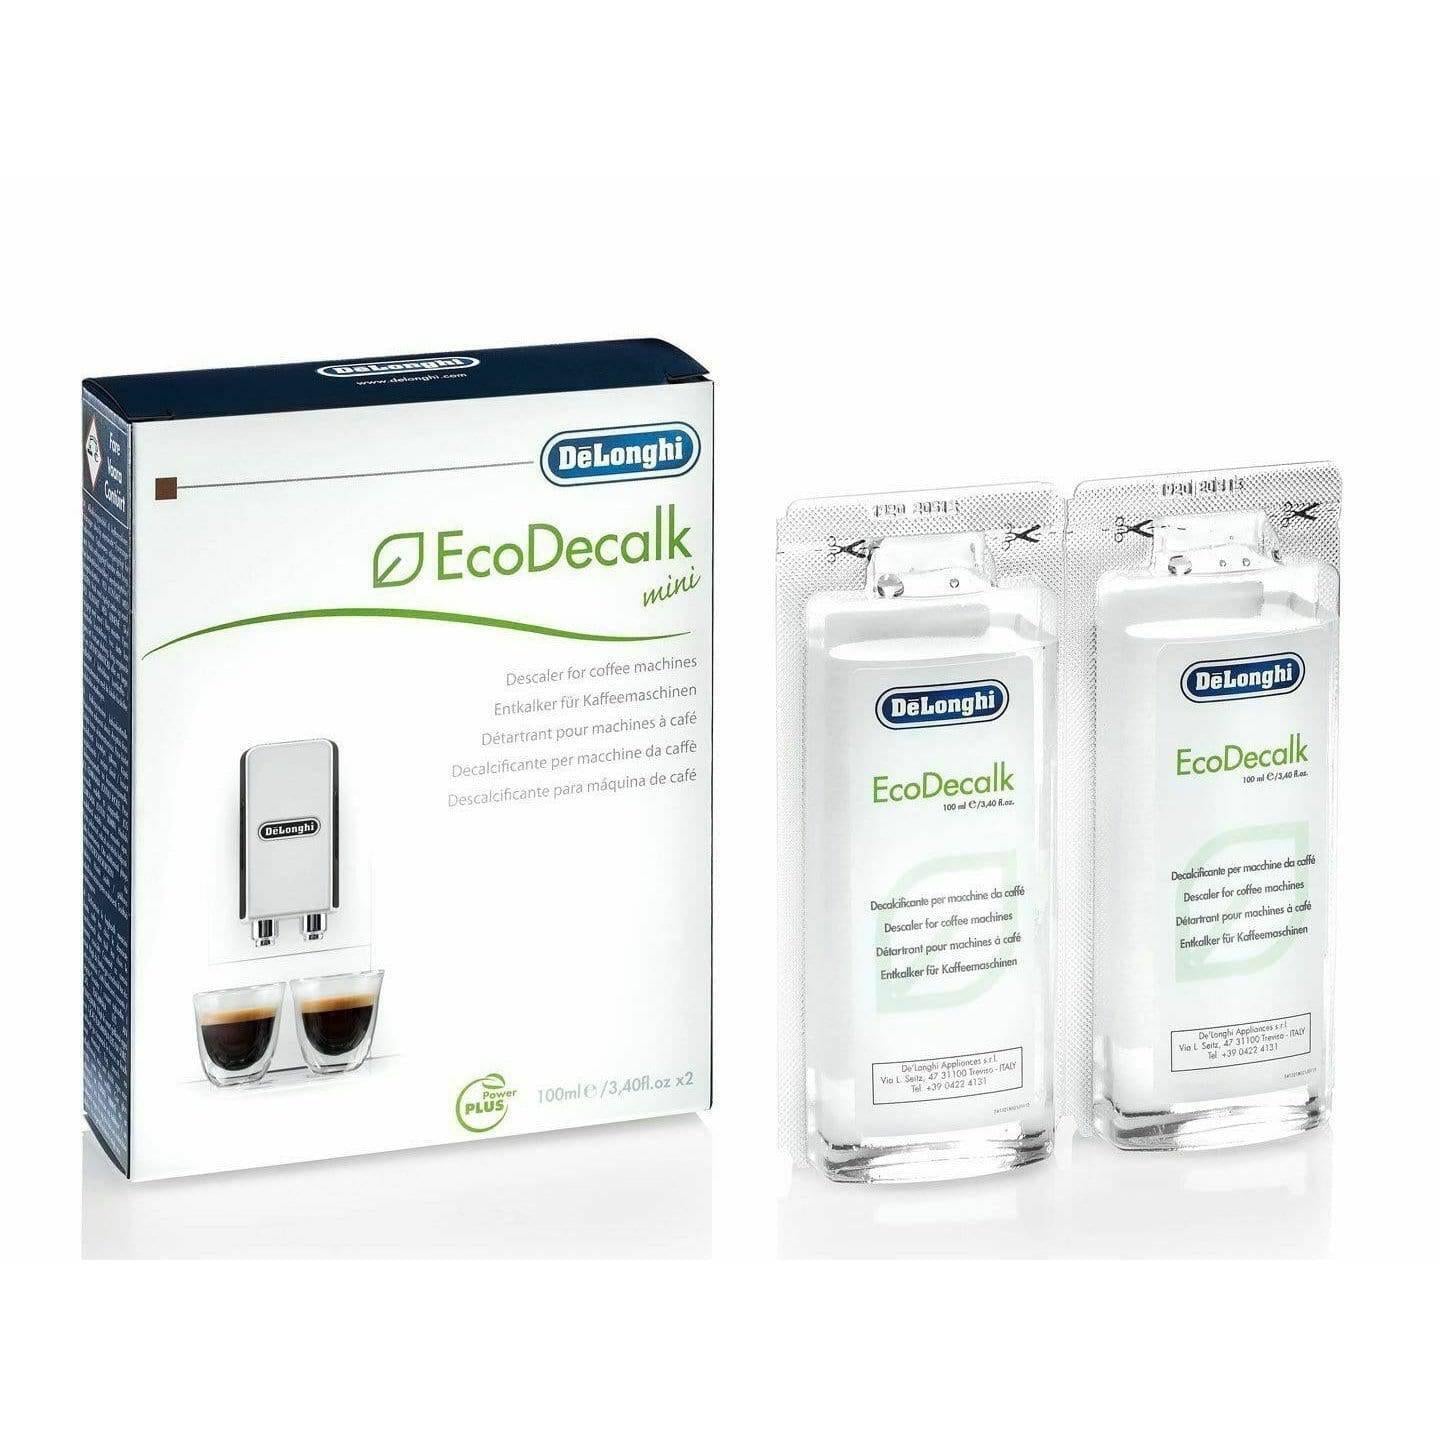 De'Longhi Mini EcoDecalk Descaling Solution - For Coffee Machines, 100ml, 2 Pack - Healthxpress.ie